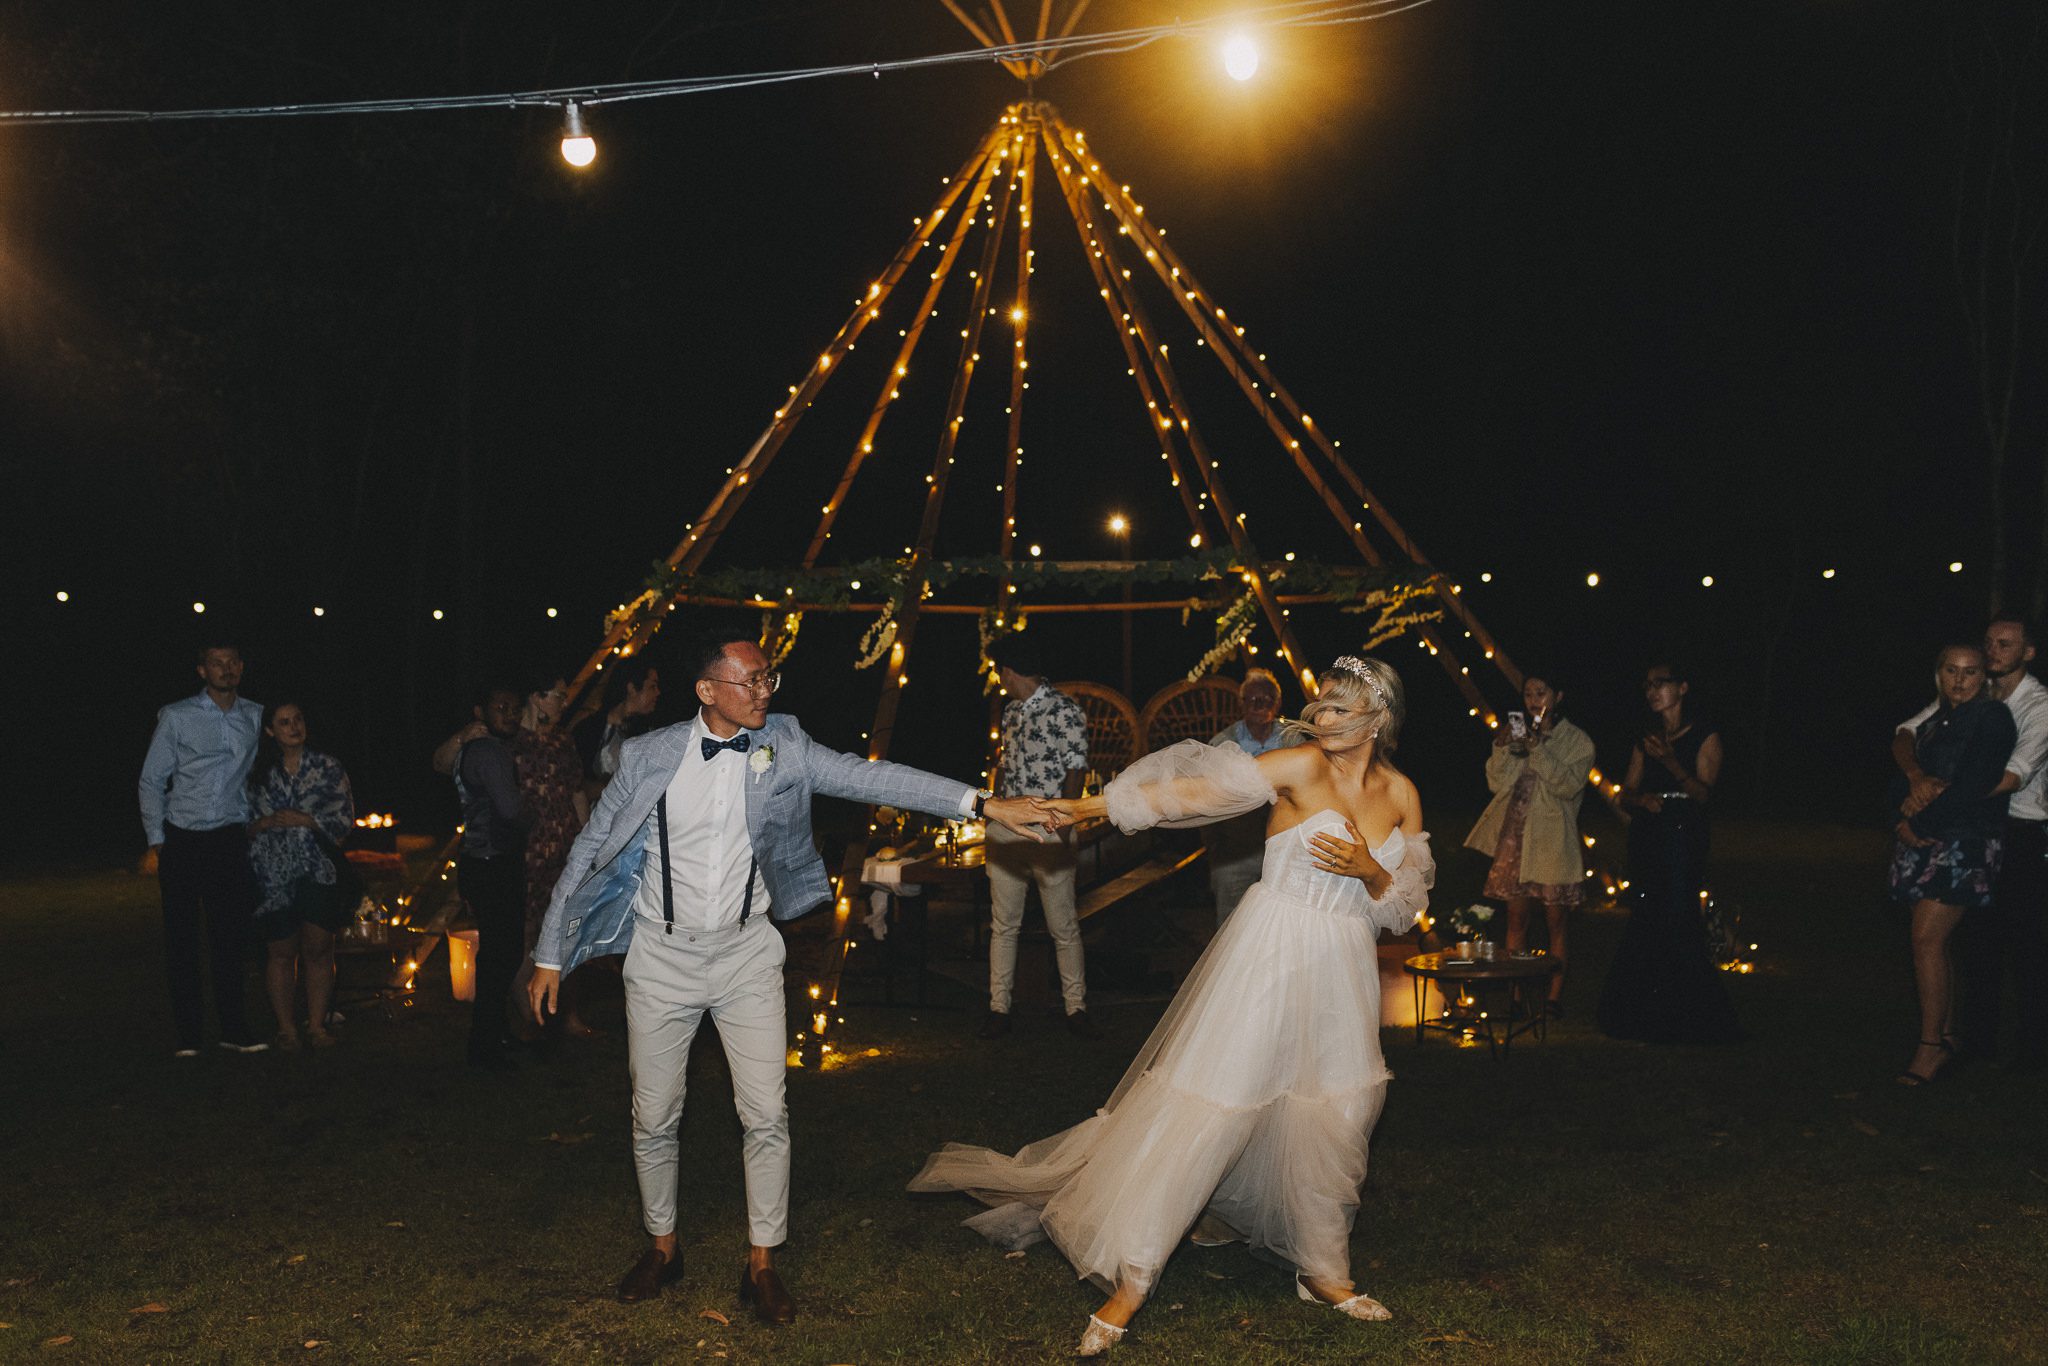 Dancing under tipi with fairy lights